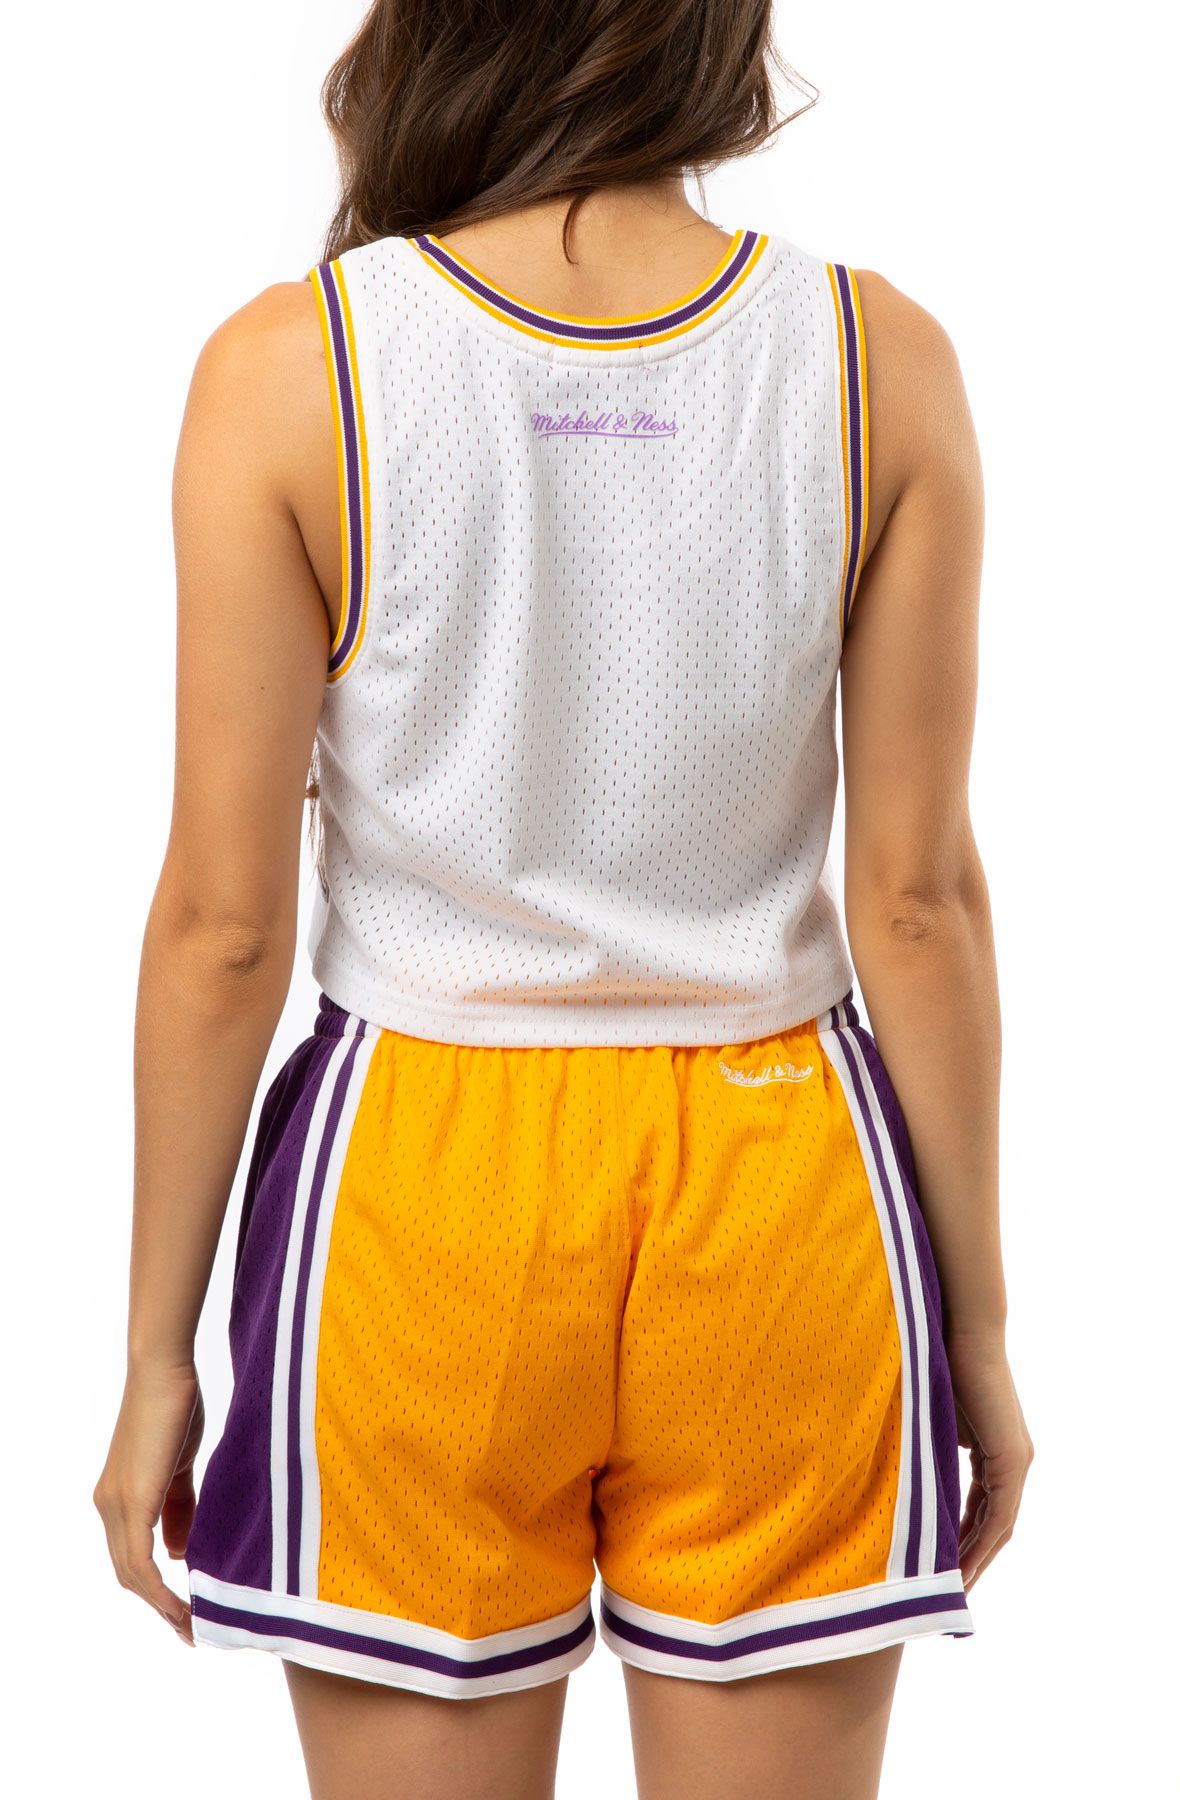 NEW Los Angeles Lakers Crop Top Baseball Jersey - USALast